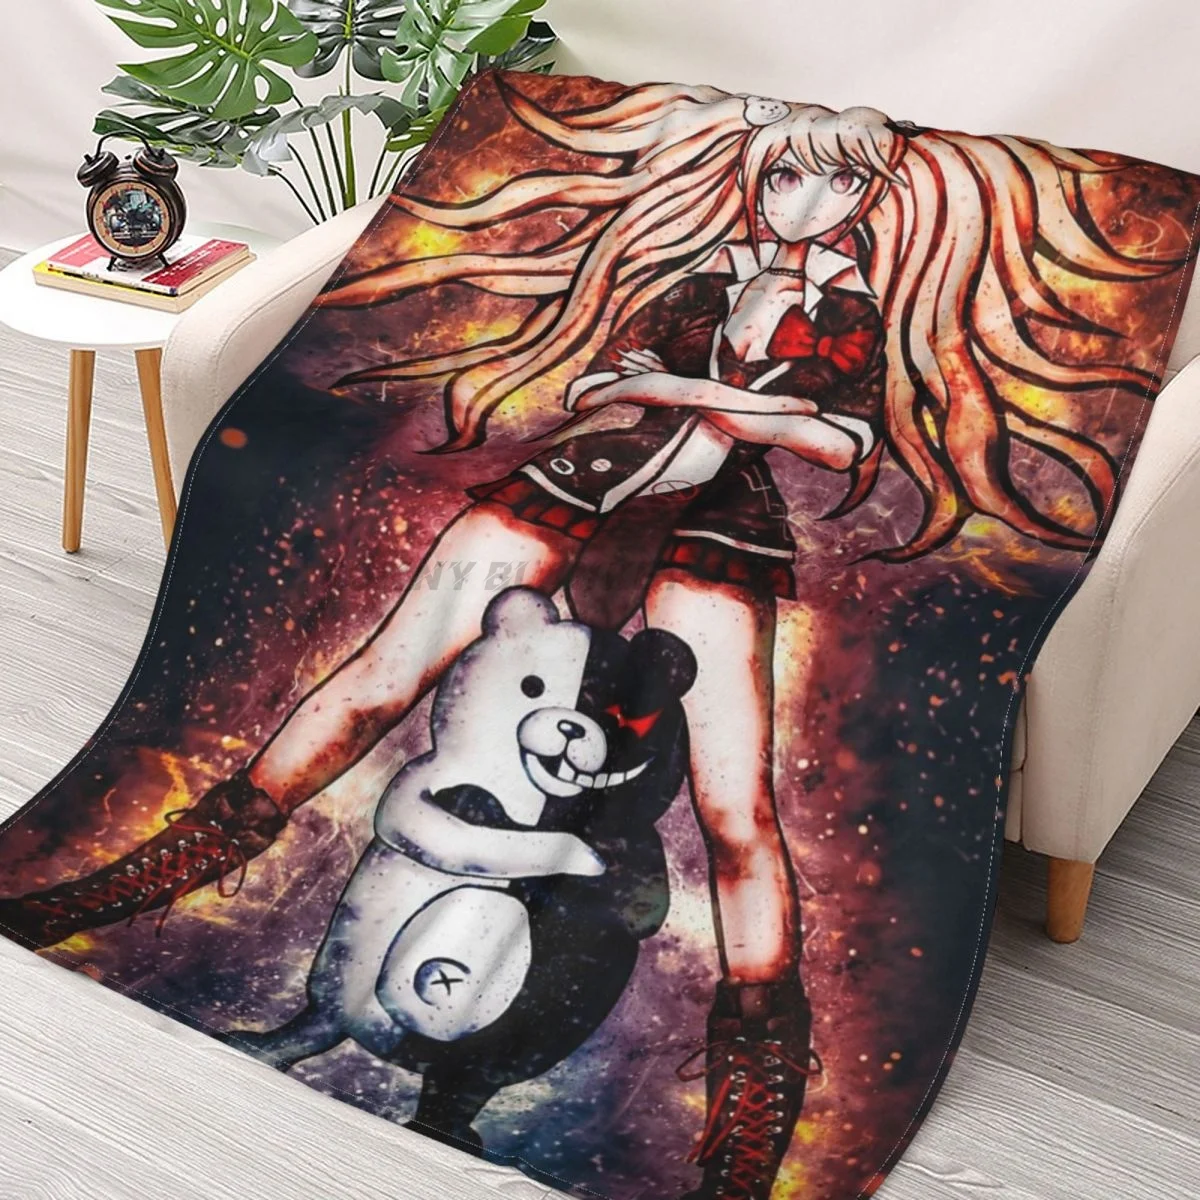 

Junko Enoshima Danganronpa Throws Blankets Collage Flannel Ultra-Soft Warm picnic blanket bedspread on the bed